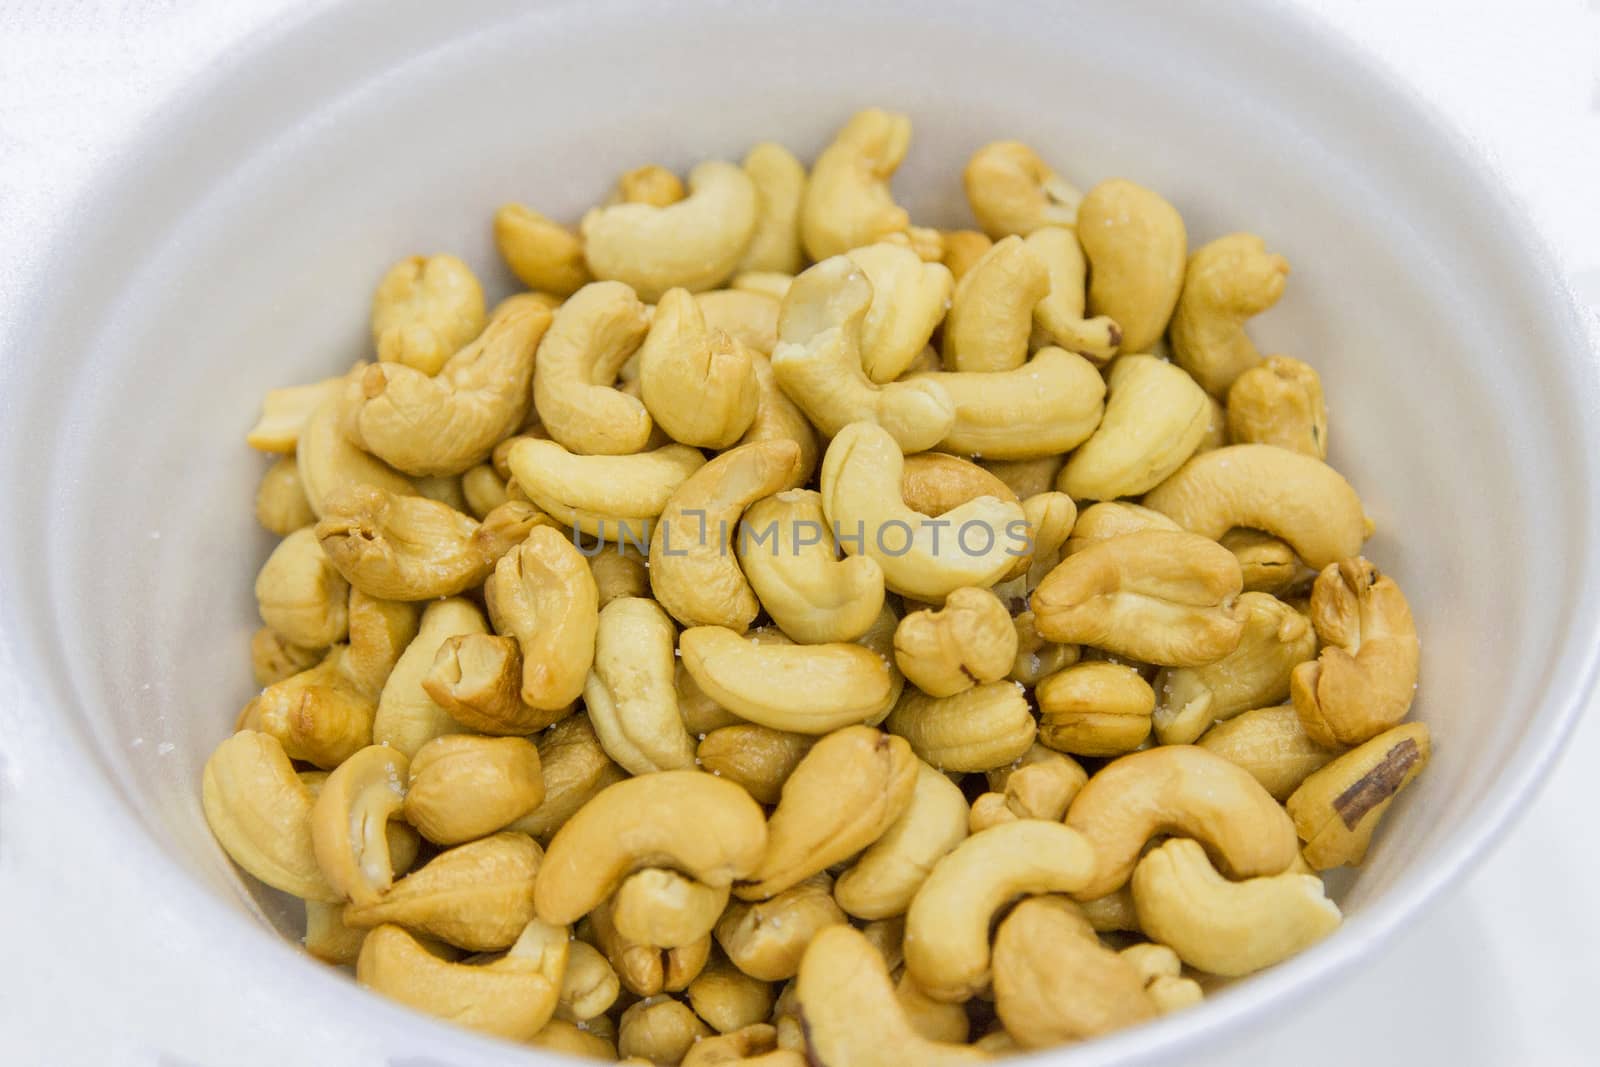 Cashews In a white container by TakerWalker